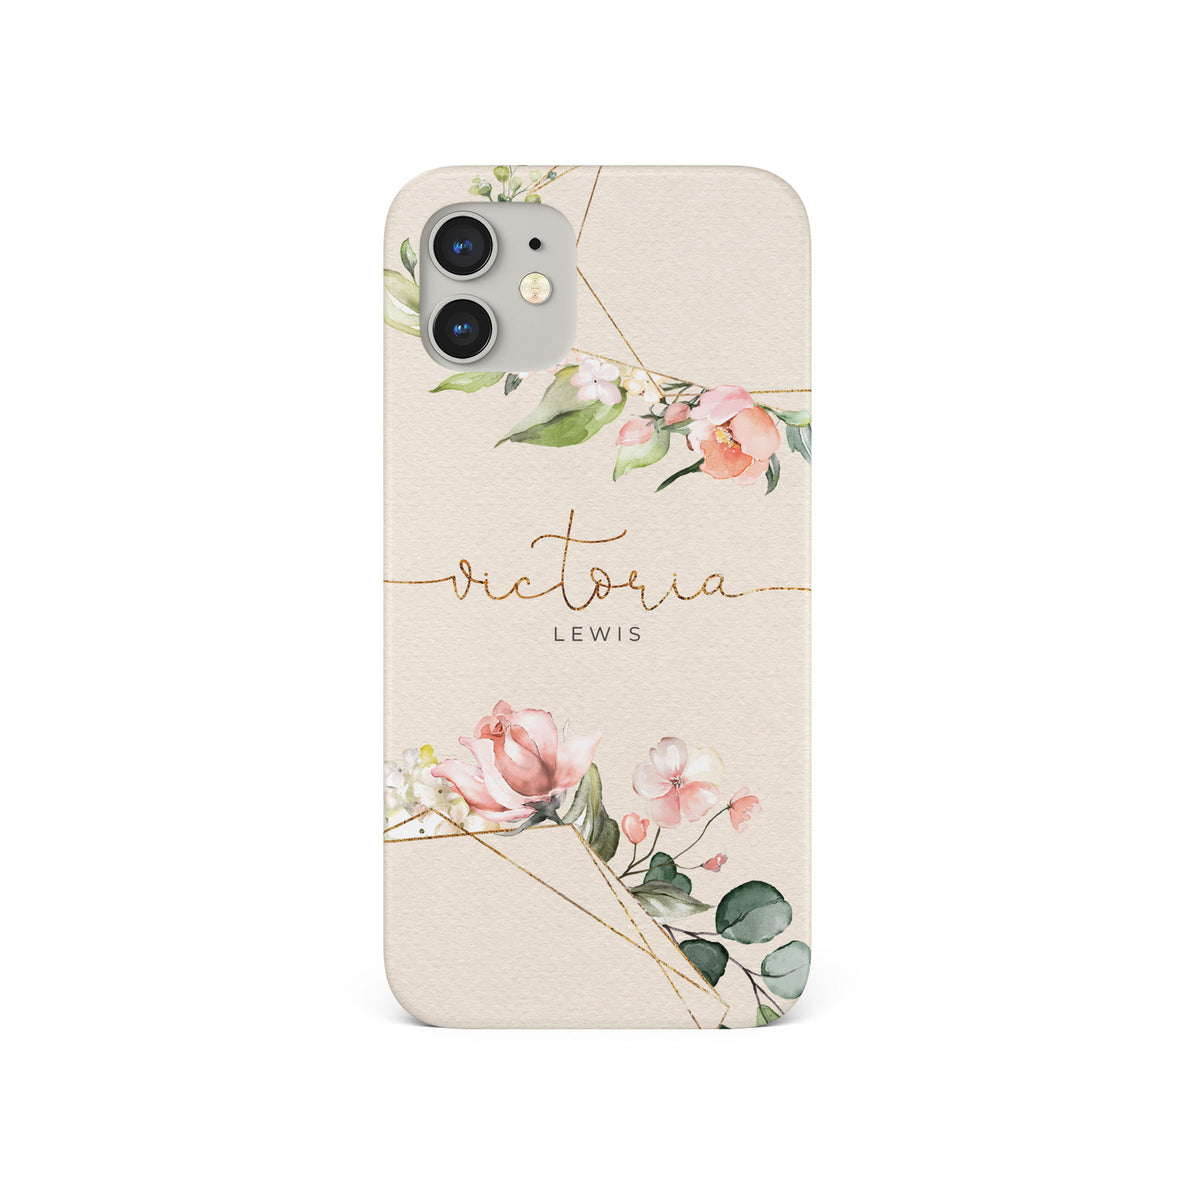 Personalised Hard Phone Case Floral Vintage Shabby Chic Blossom Branch